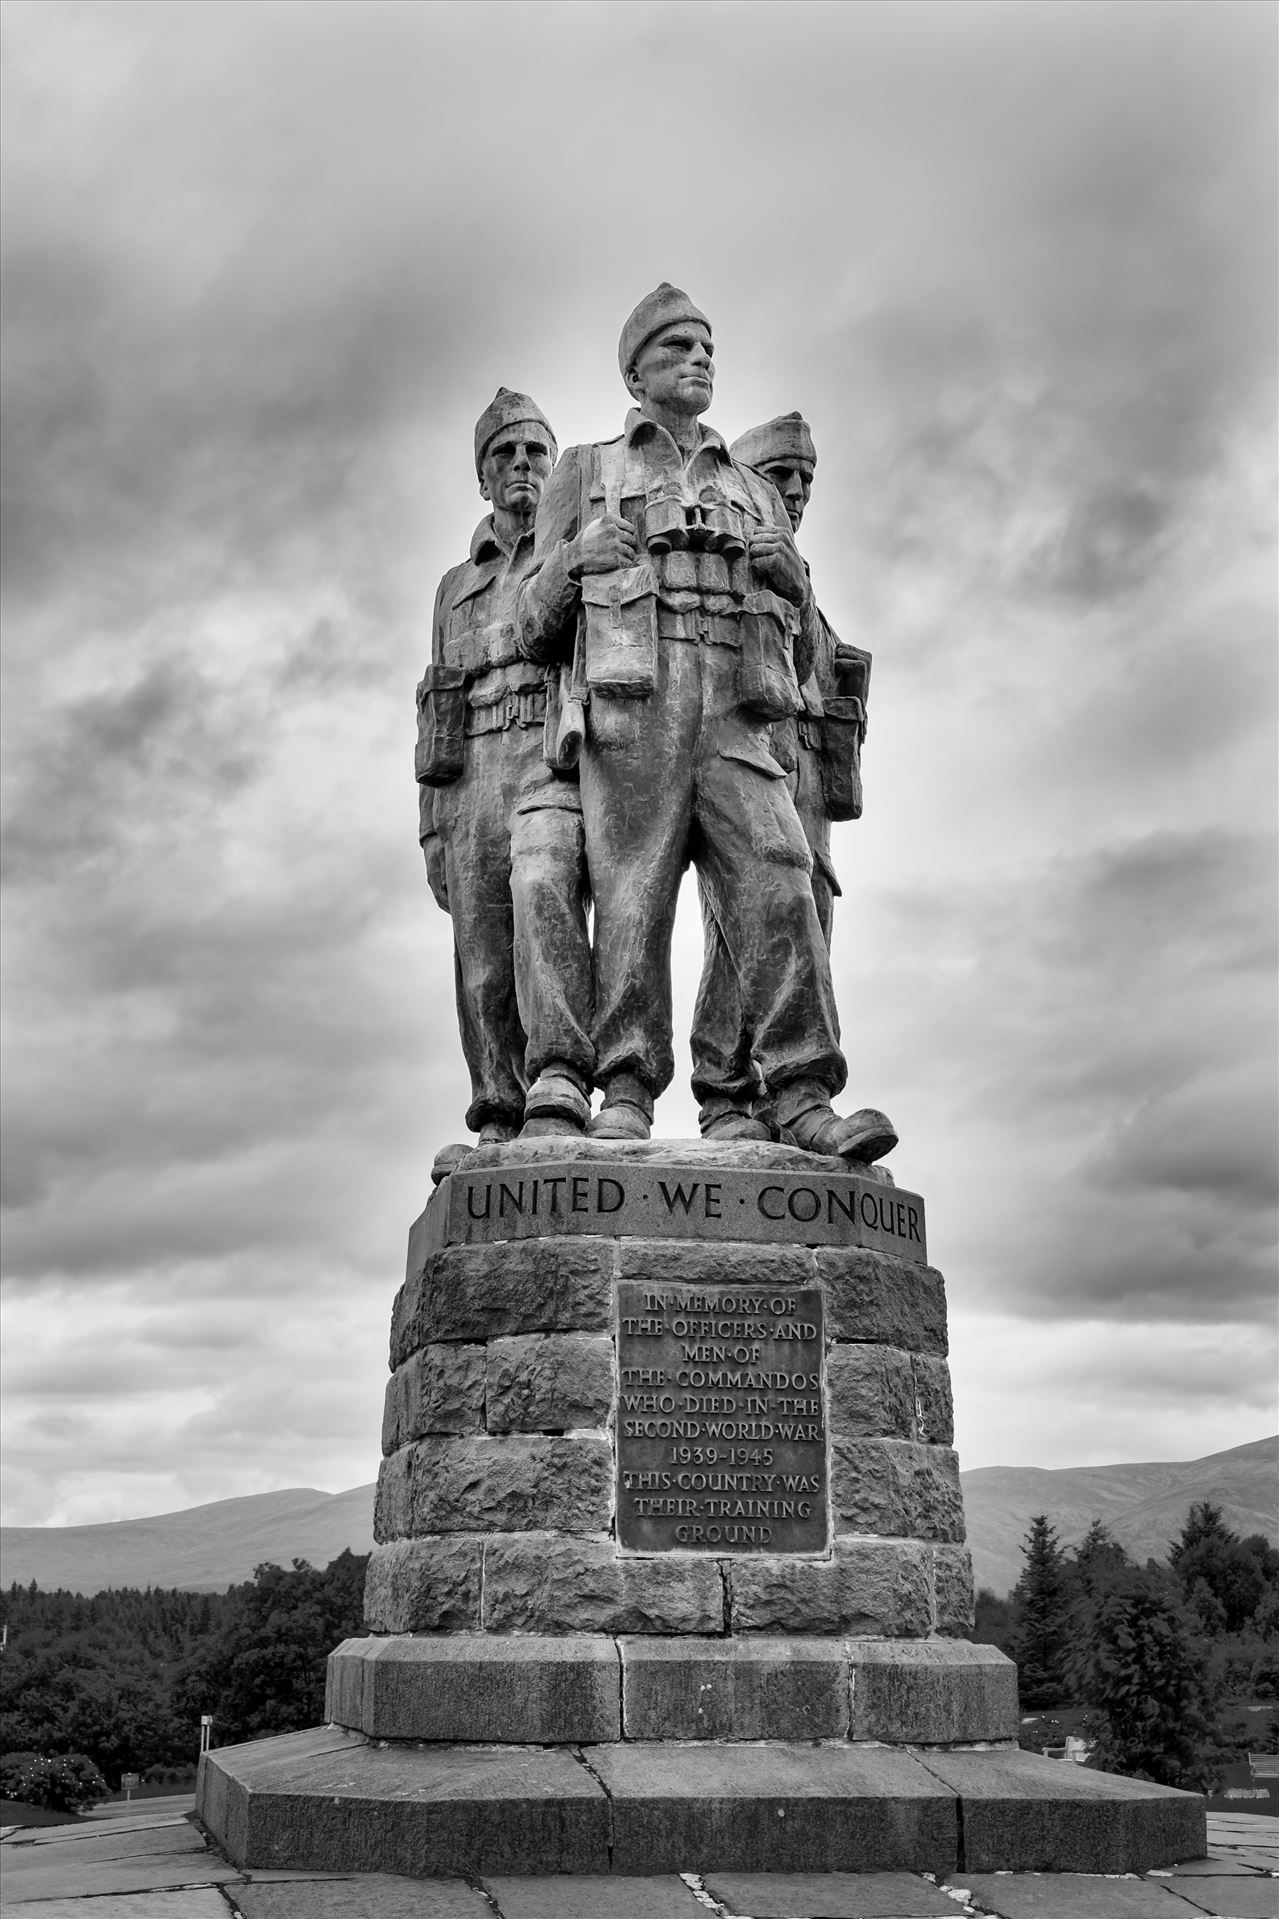 Commando memorial The Commando Memorial is a Category A listed monument in Scotland, dedicated to the men of the original British Commando Forces raised during World War II. Situated around a mile from Spean Bridge village by philreay